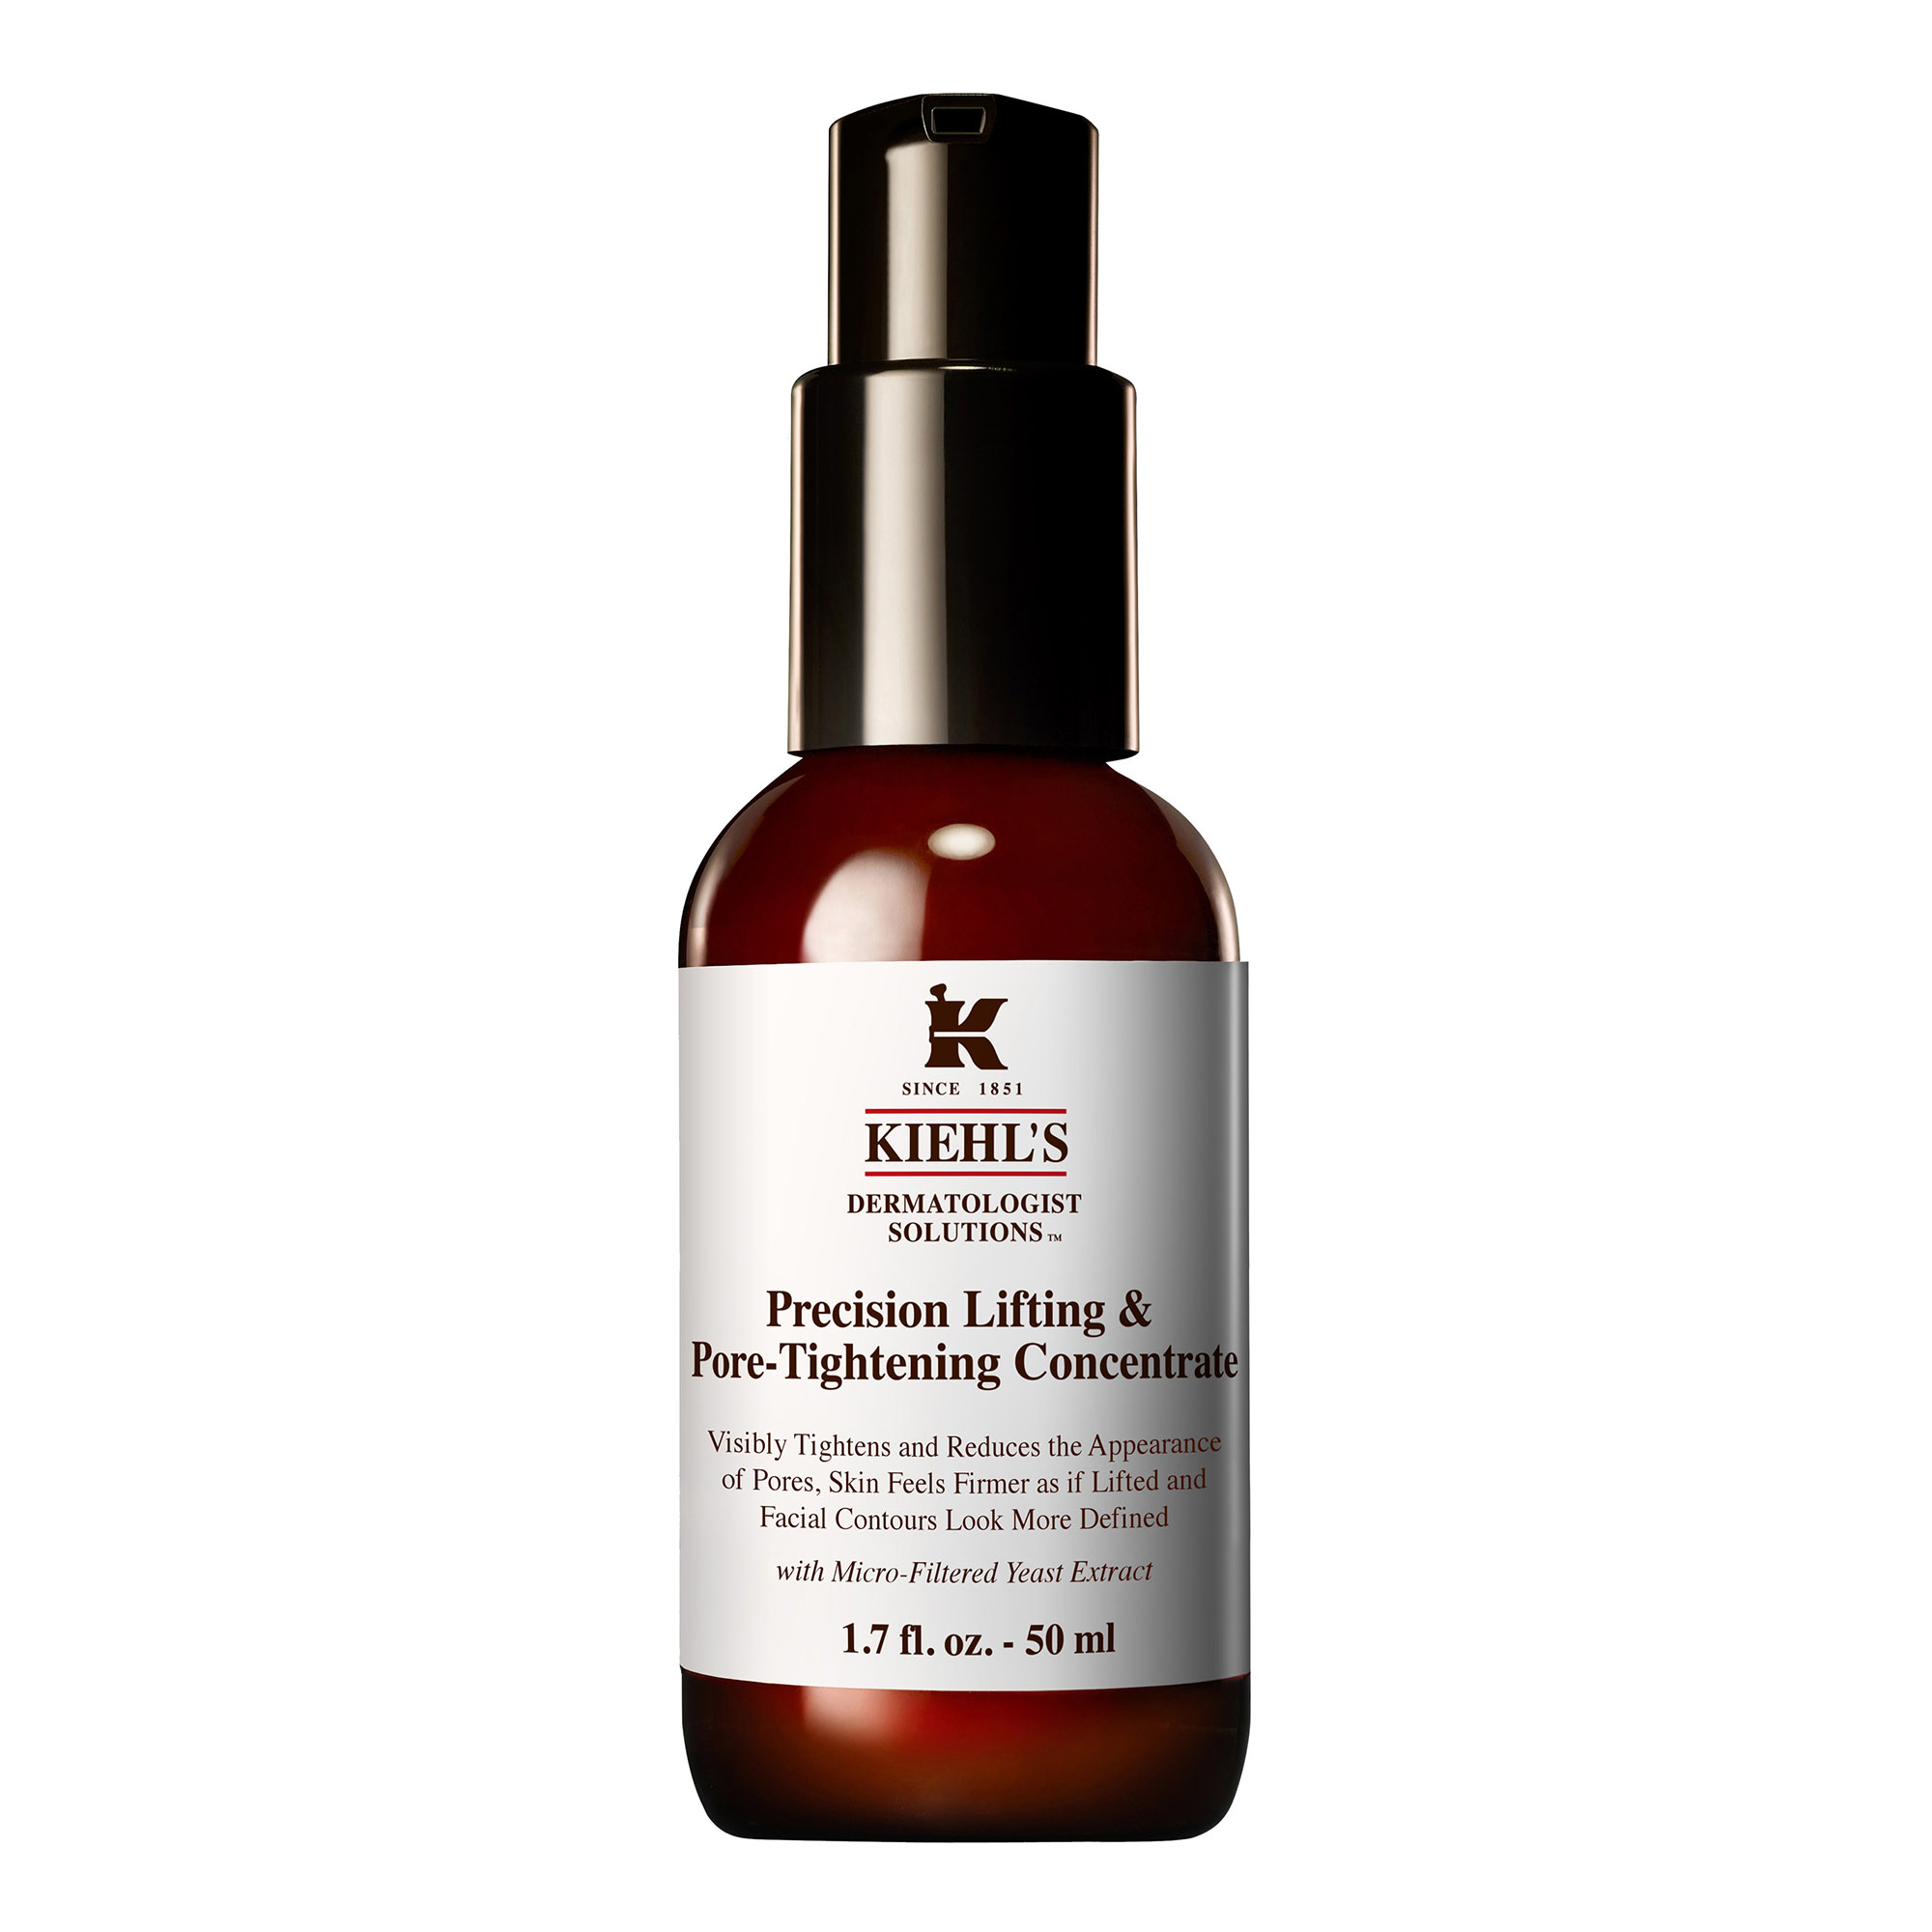 PRECISION LIFTING & PORE-TIGHTENING CONCENTRATE 50ML